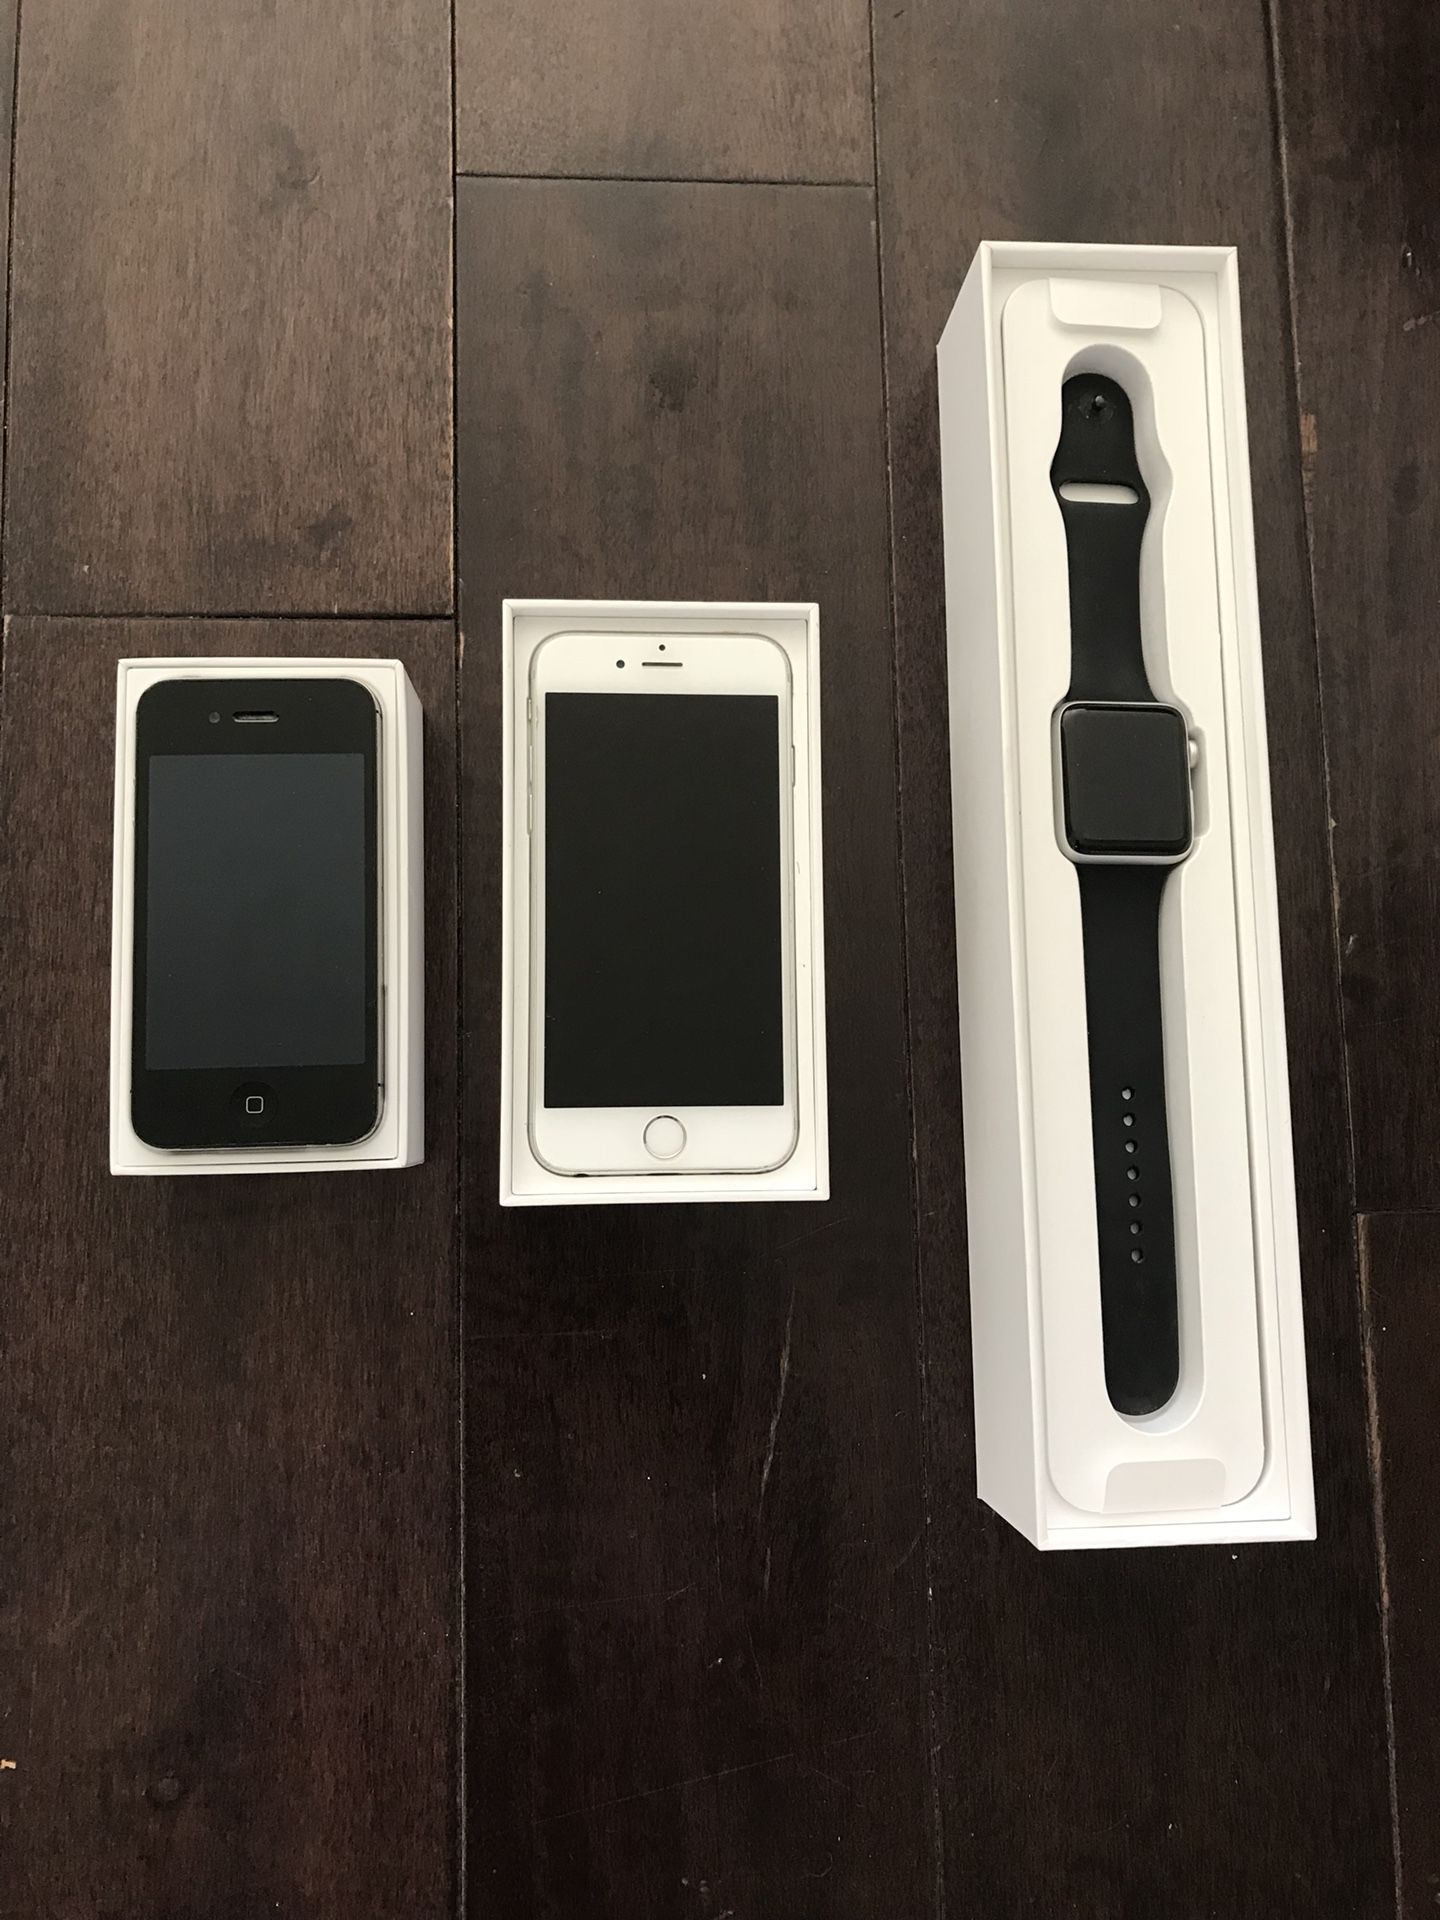 Apple Watch (Series 2), IPhone 6 & 4s - ITEMS SOLD SEPARATELY